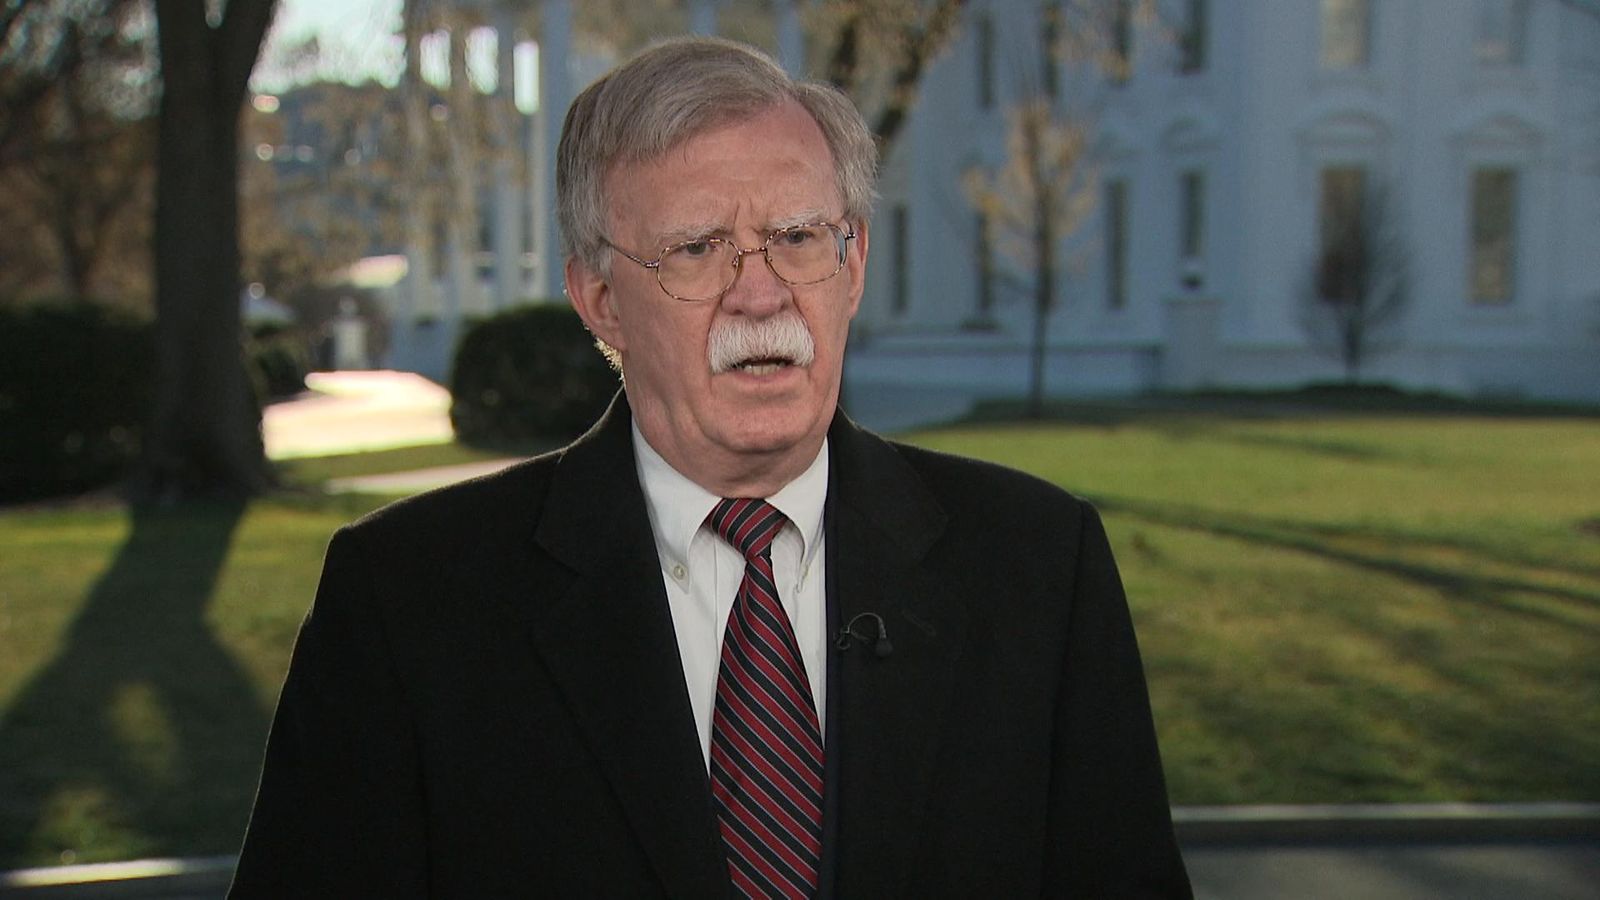 'We're ready for a US-UK deal': Trump adviser John Bolton says America wants to ...